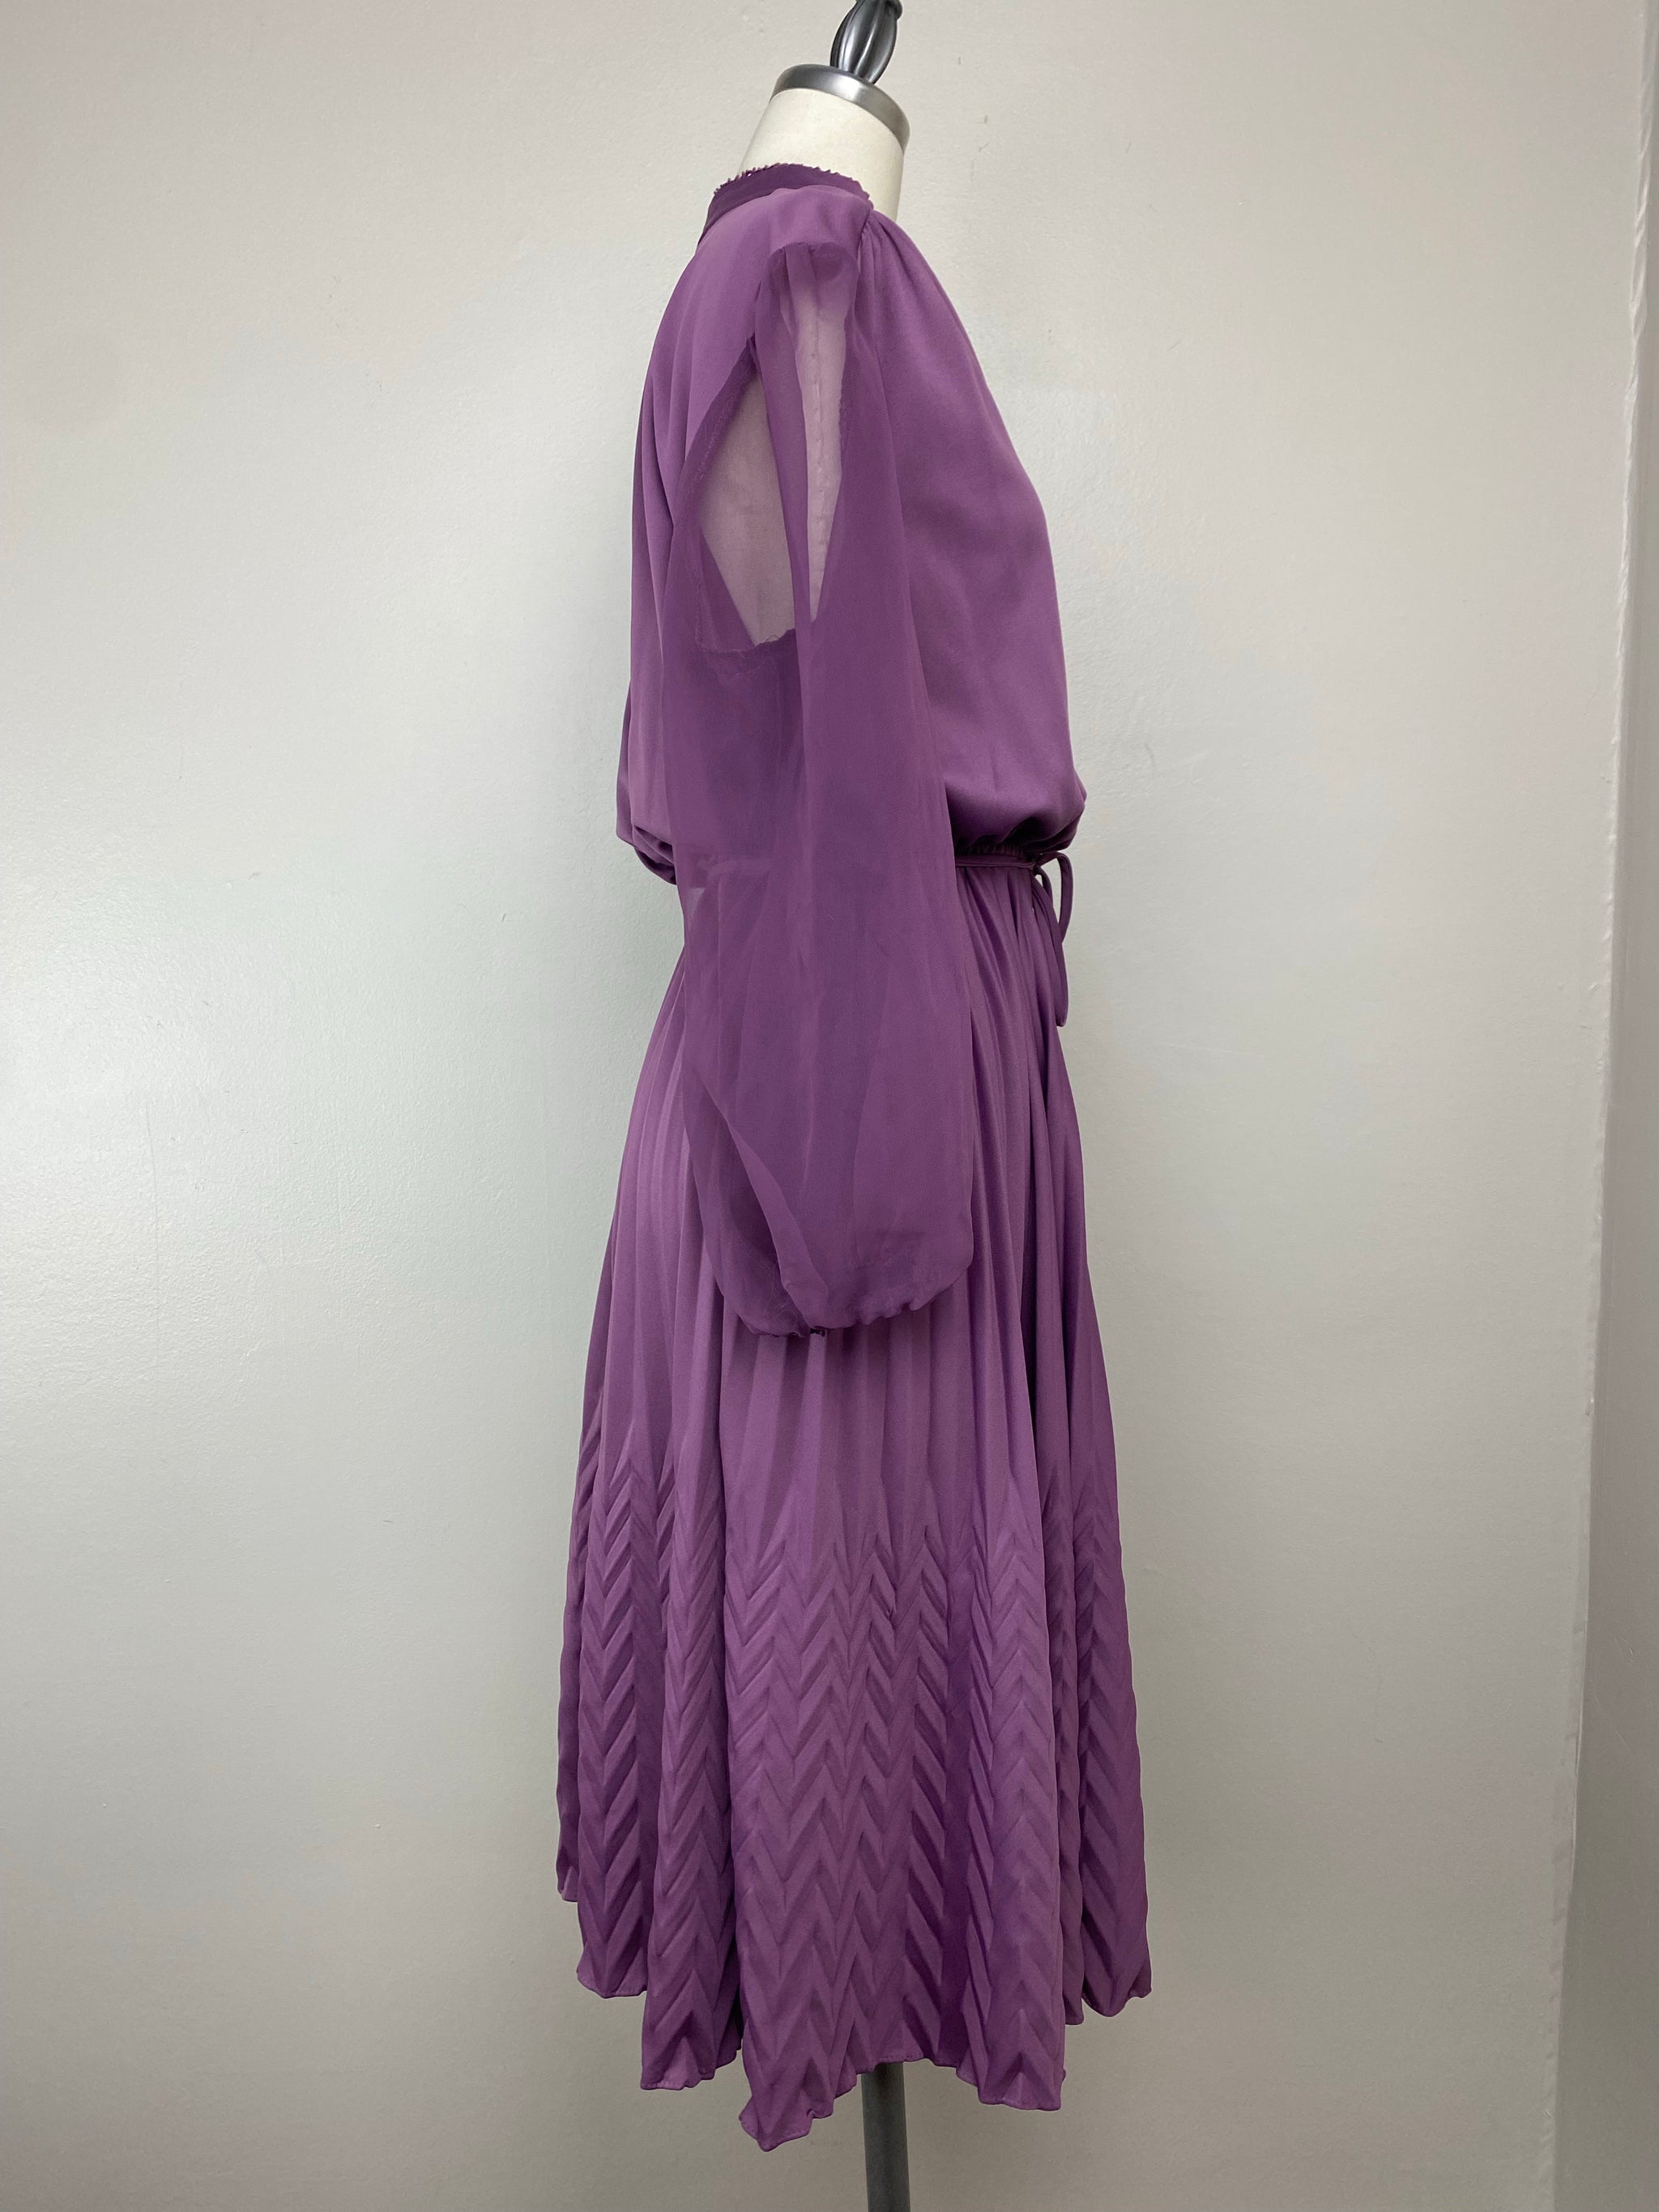 1970s Purple Midi Dress with Sheer Sleeves, Size M/L – Proveaux Vintage